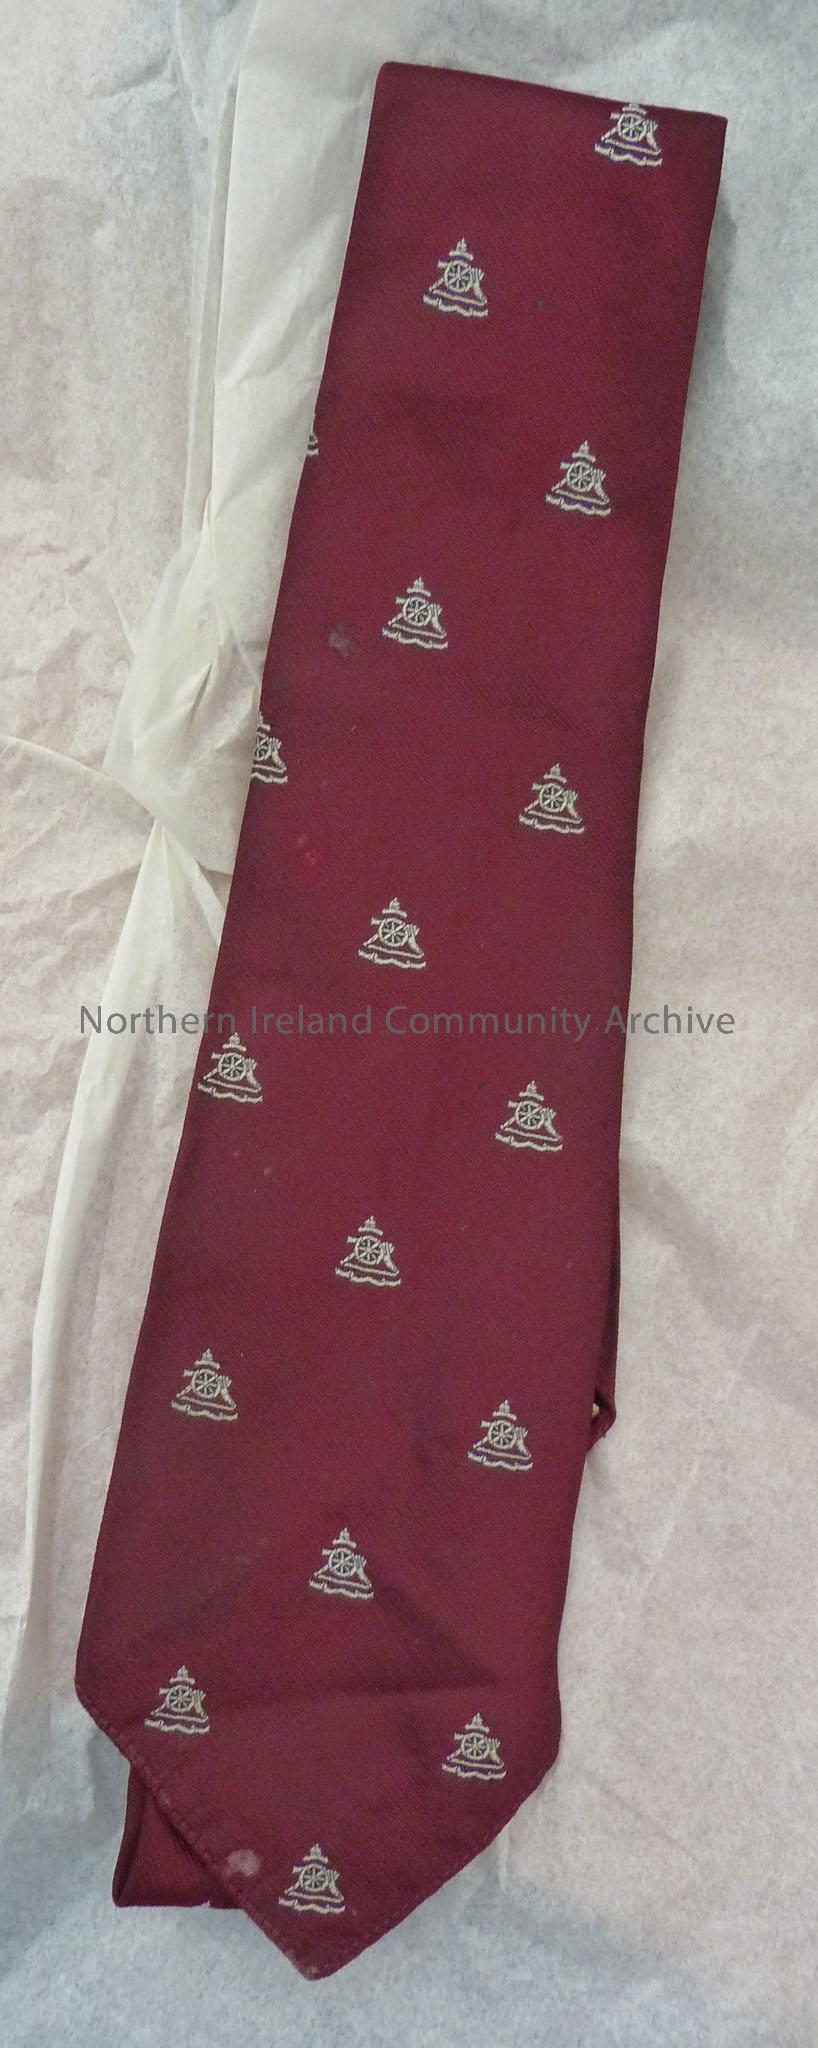 Maroon neck tie with images across it of a canon with a crown above.